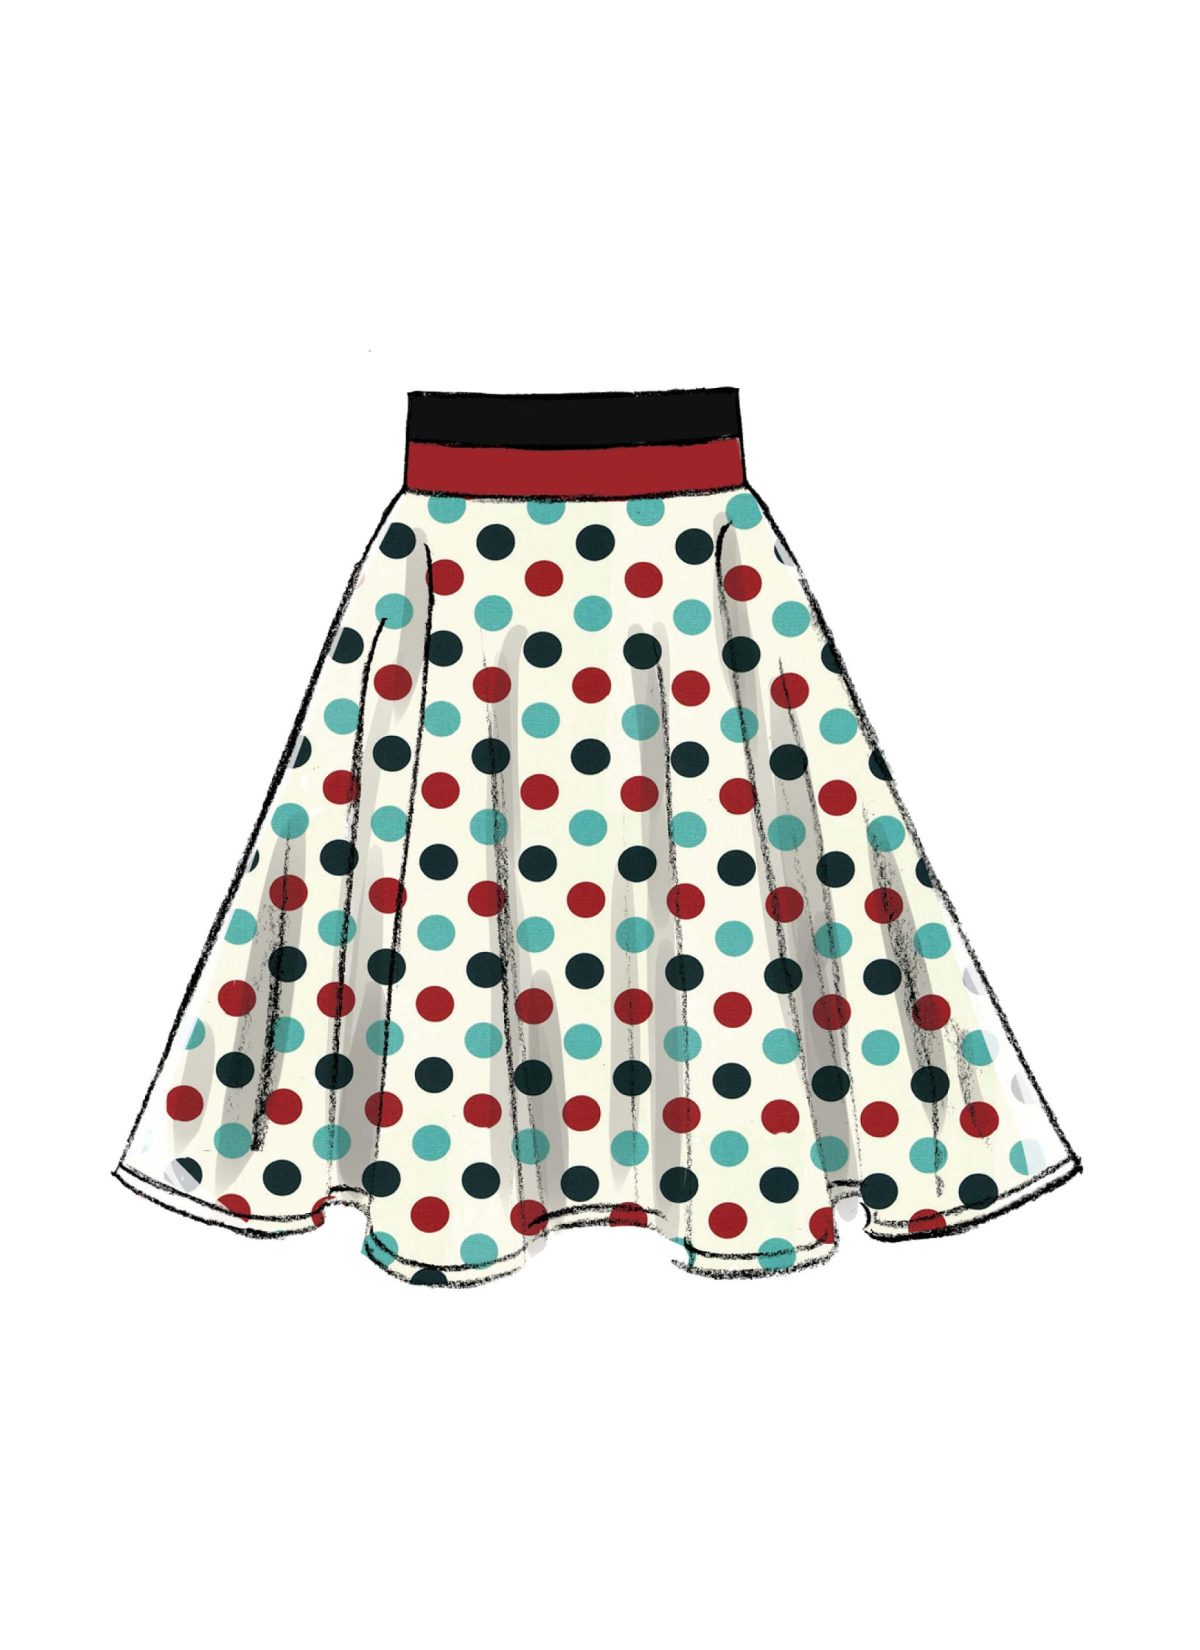 McCall's Sewing Pattern M7197 Misses' Skirts